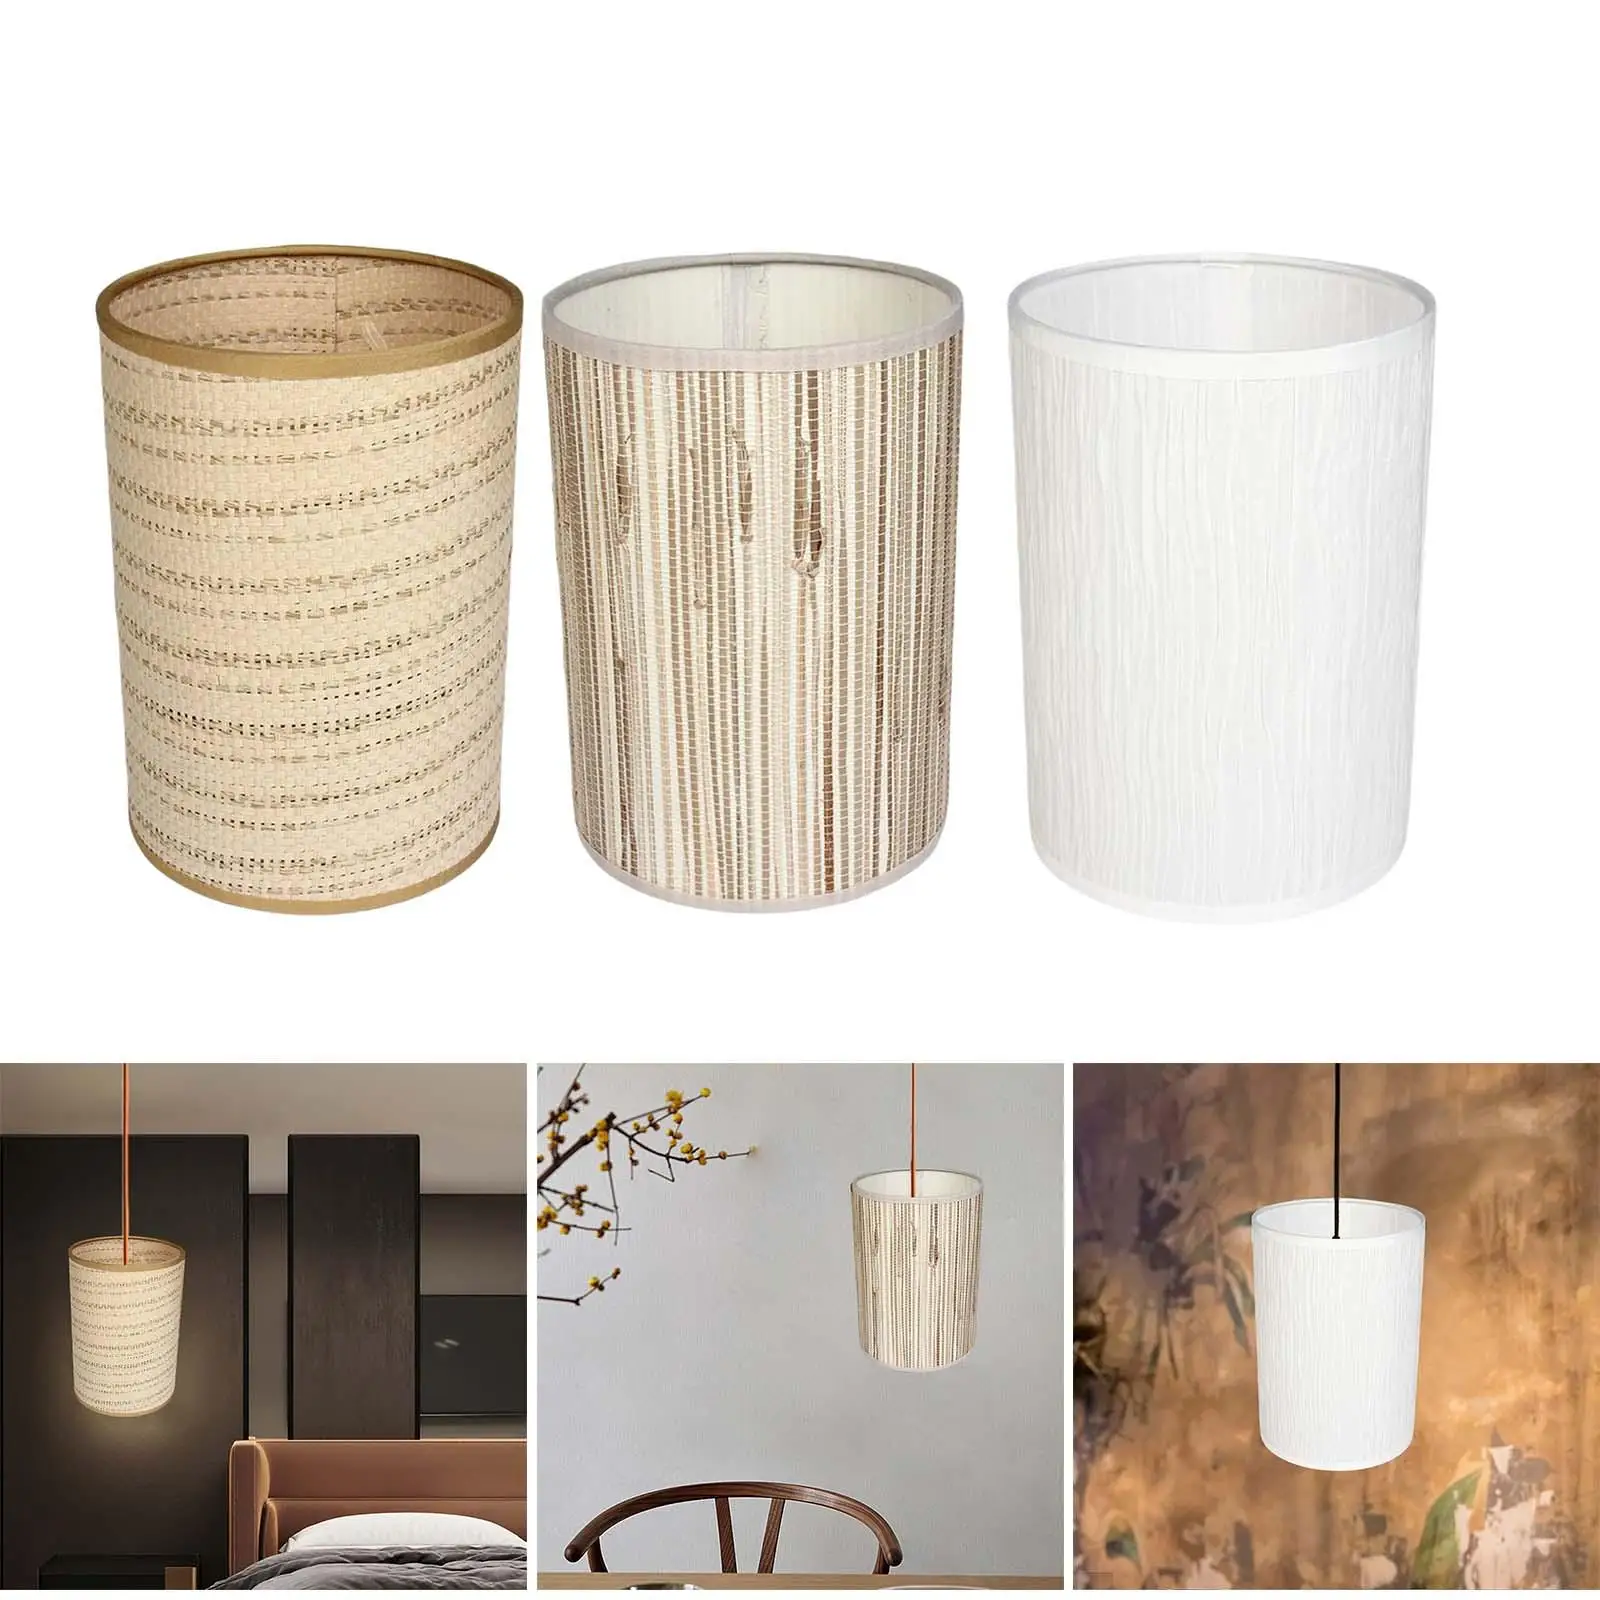 New Chinese Style Retro Pendant Lamp Shade Decorative Bulb Guard Lampshade for Kitchen Island Dining Room Bedroom Bar